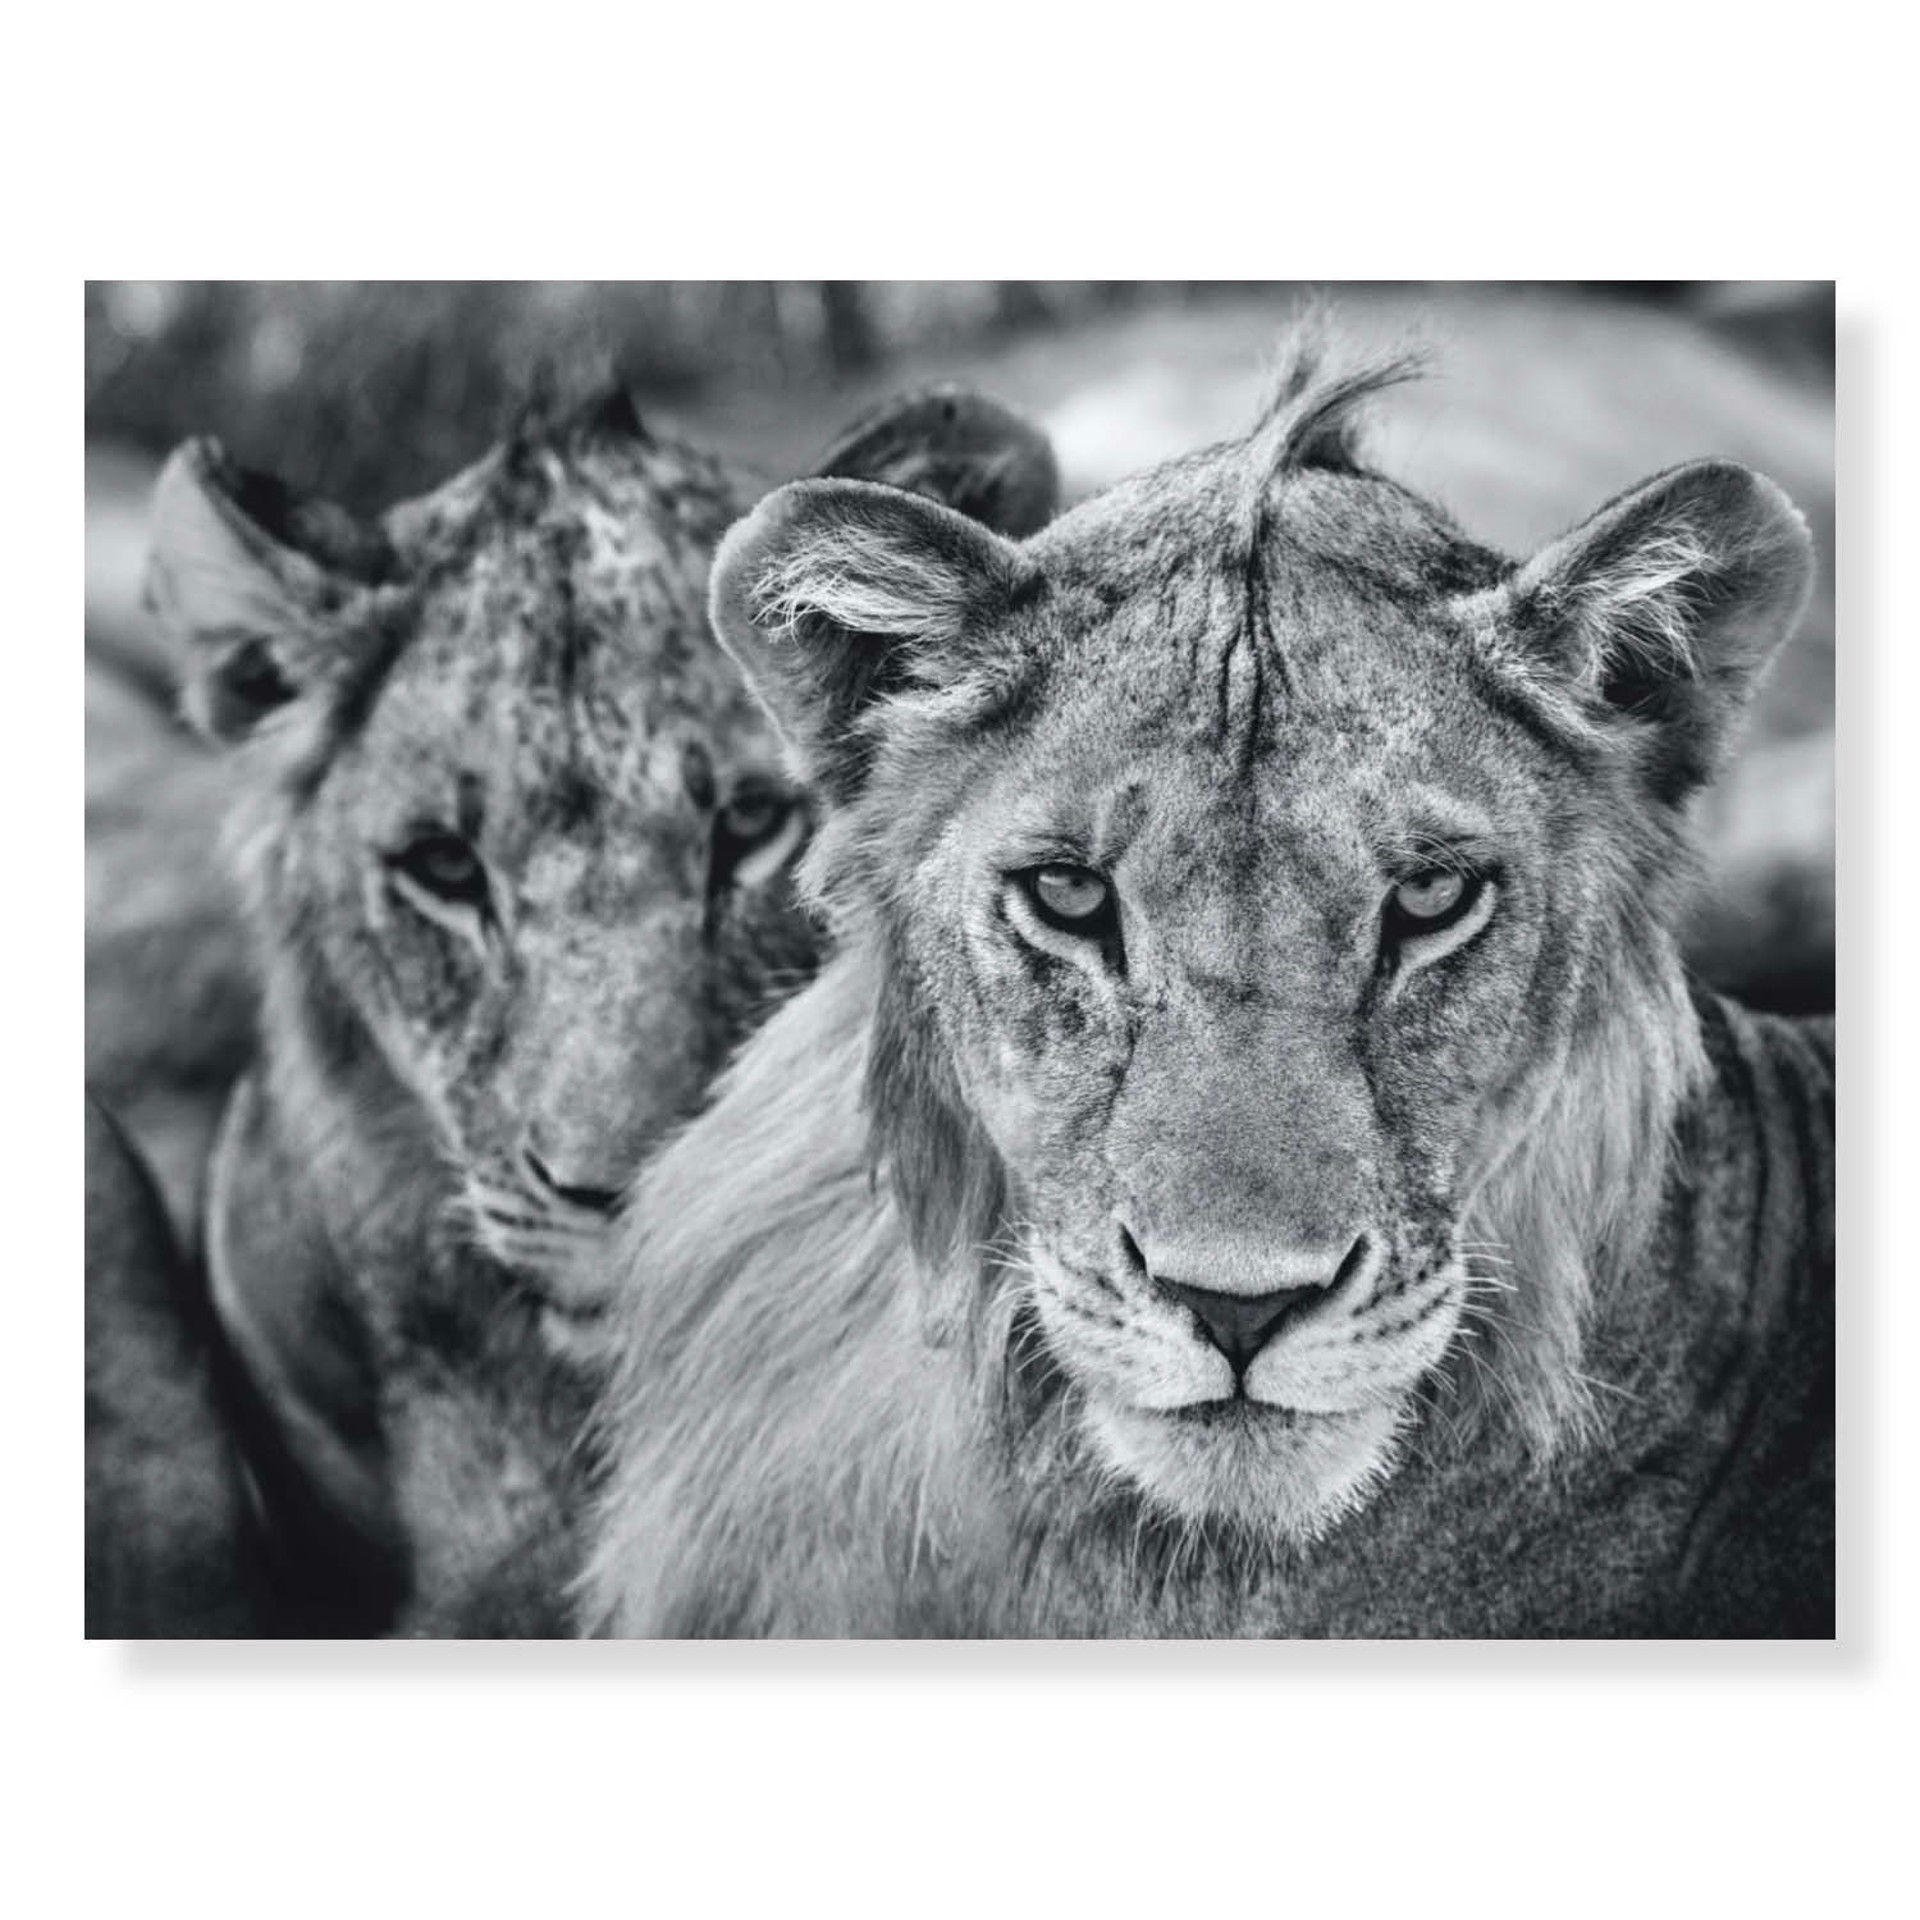 The Boys Are Back in Town by David Yarrow